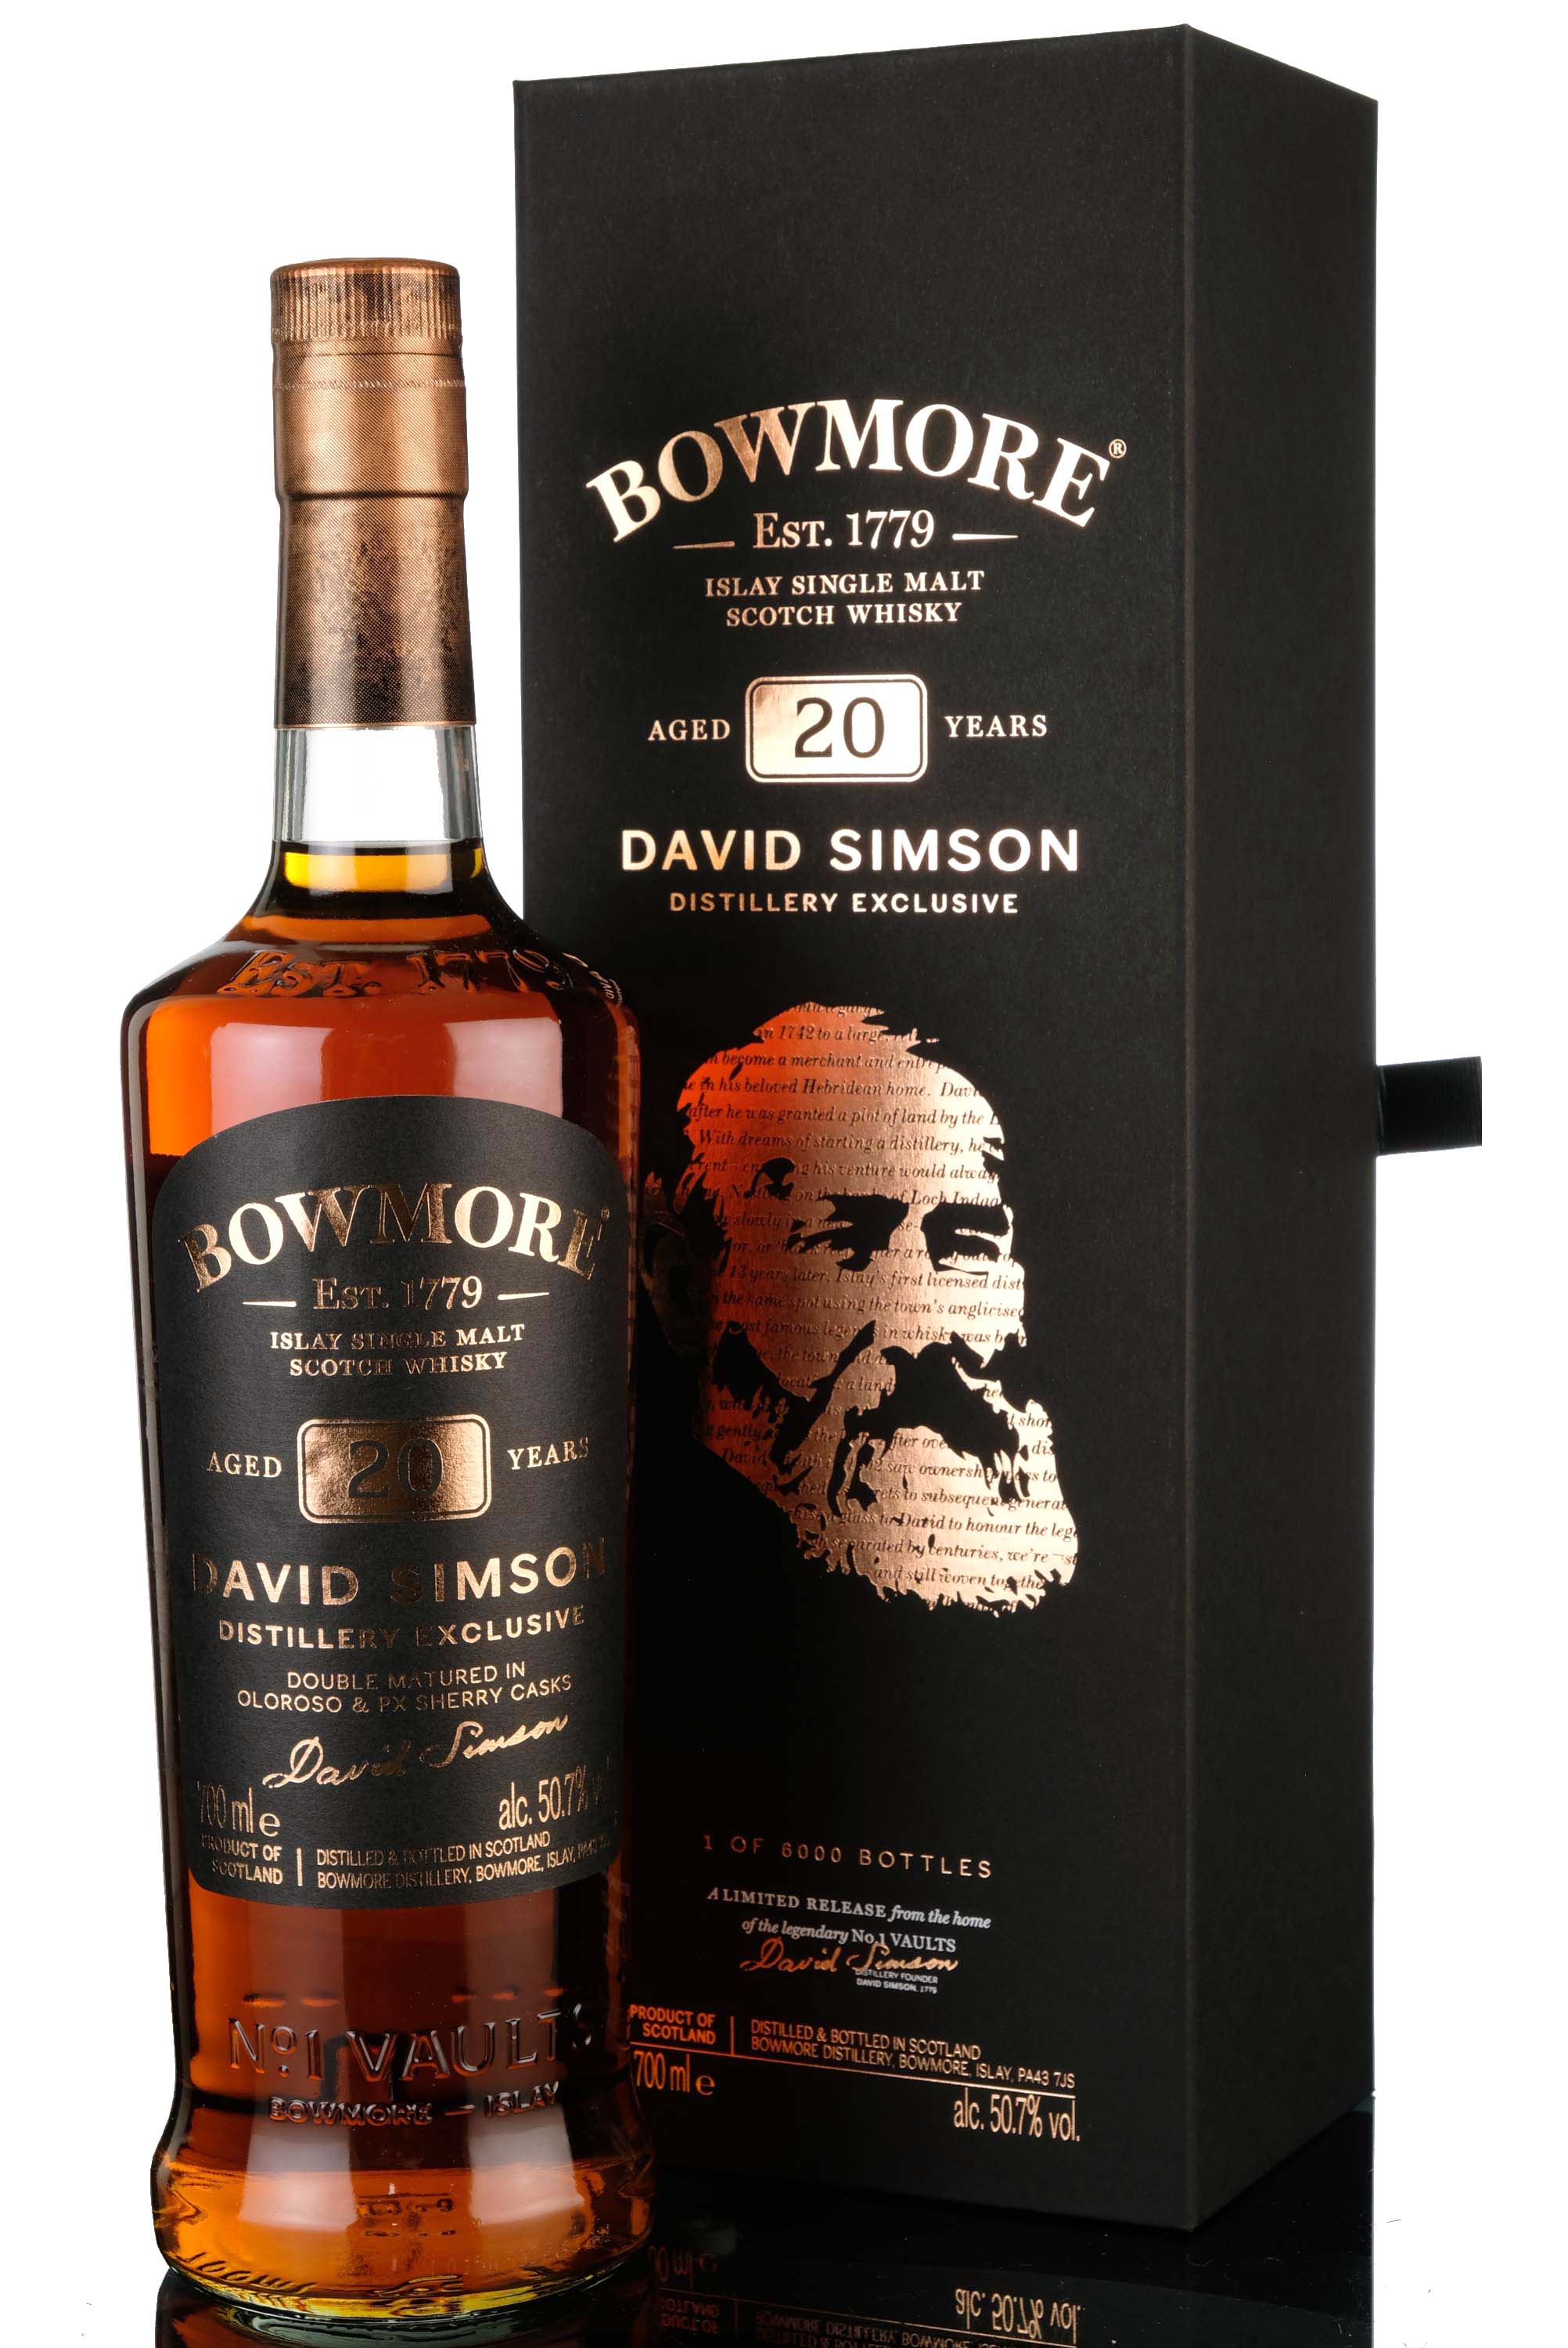 Bowmore 20 Year Old - David Simson - Distillery Exclusive